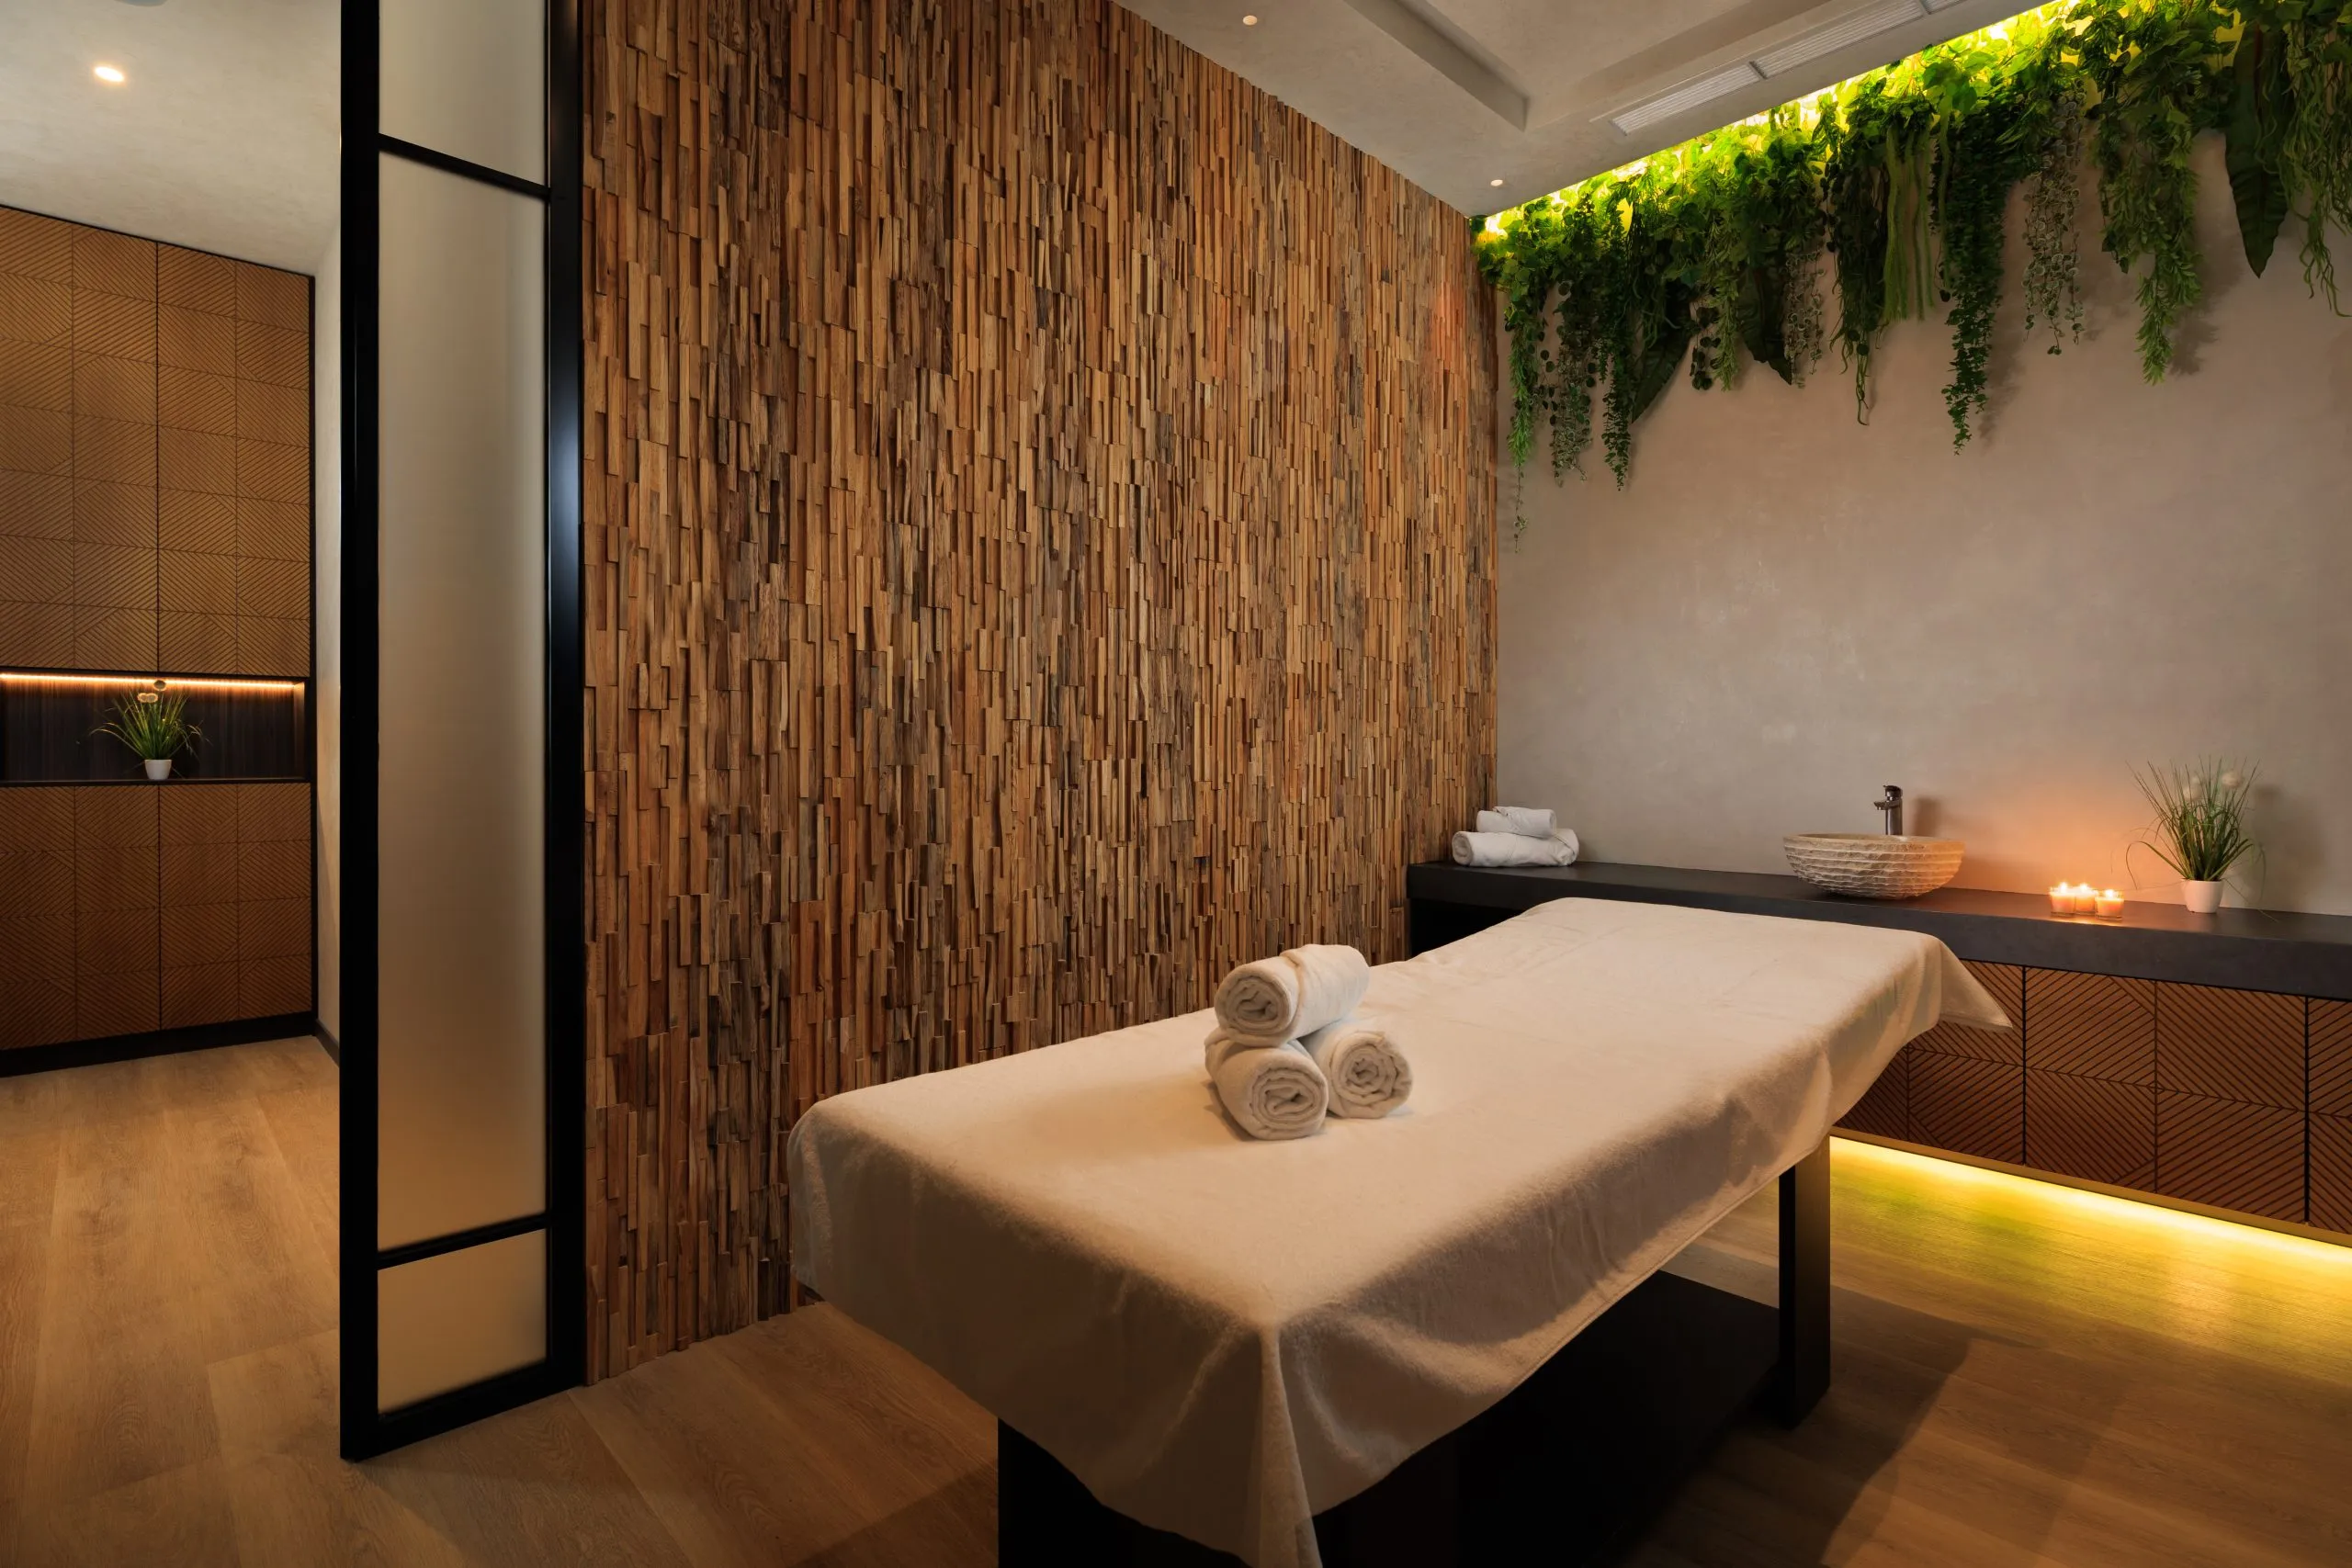 Absolute SPA in Colombia, South America  - Rated 1